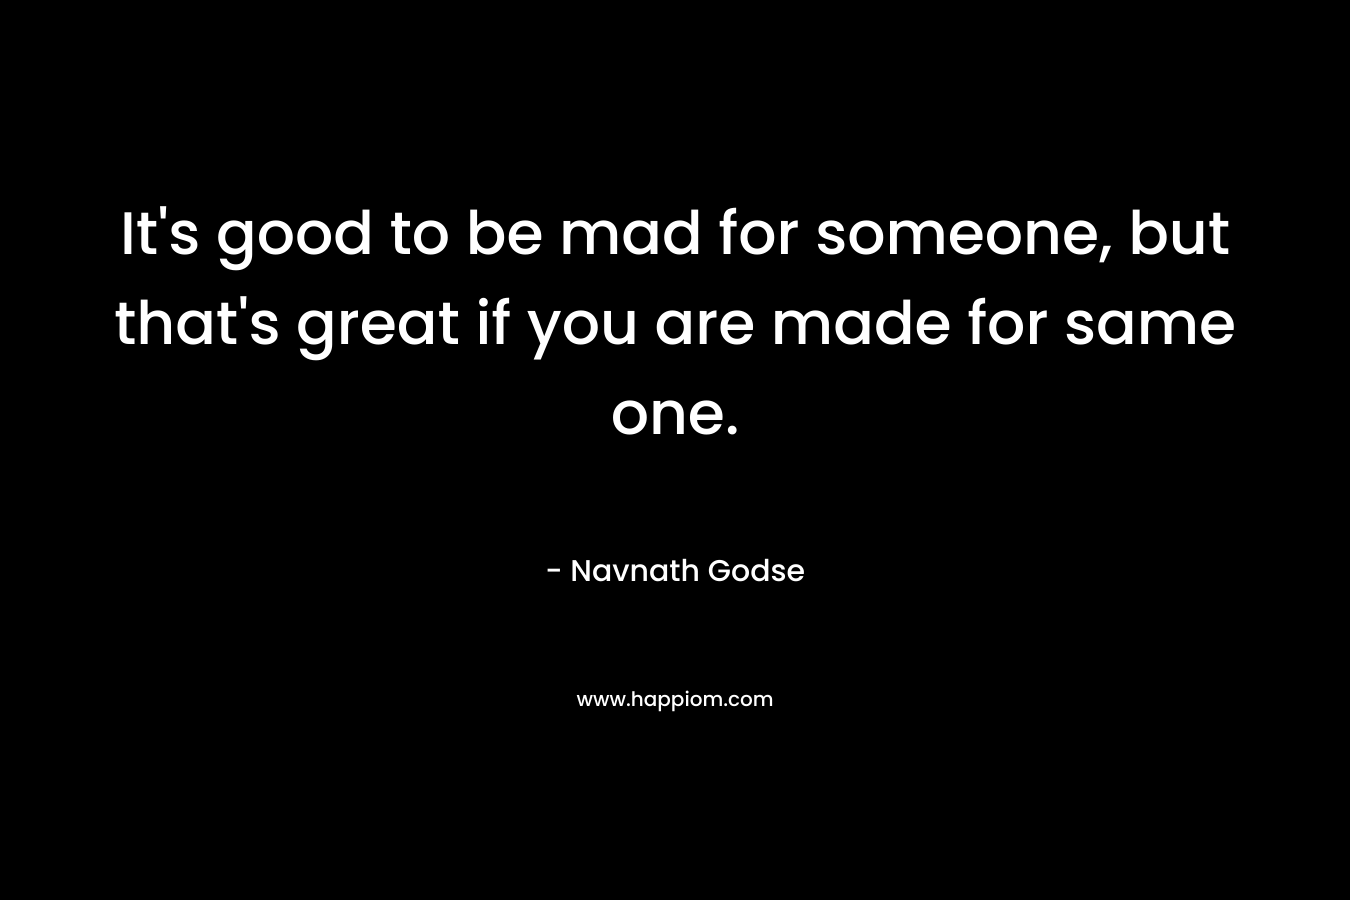 It’s good to be mad for someone, but that’s great if you are made for same one. – Navnath Godse